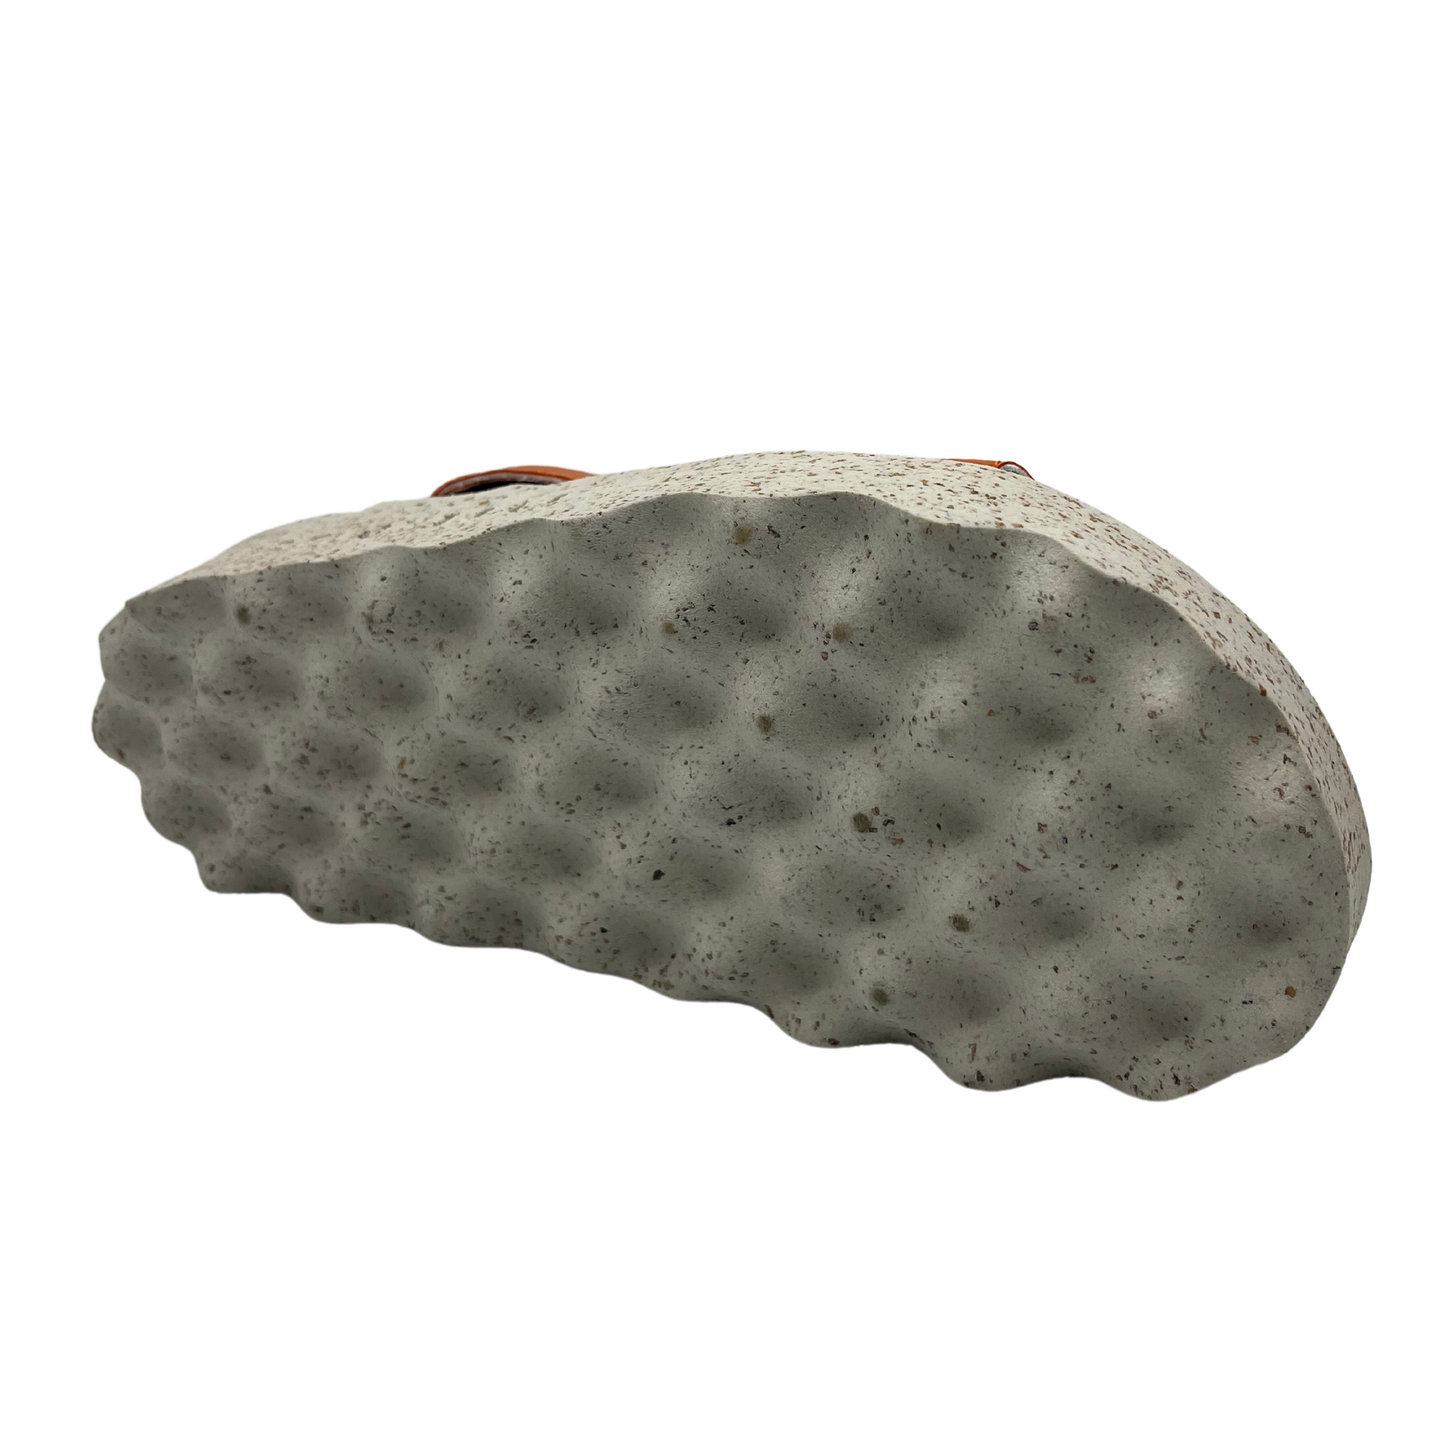 Bottom view of orange strapped sandal with contoured footbed and speckled white and brown outsole